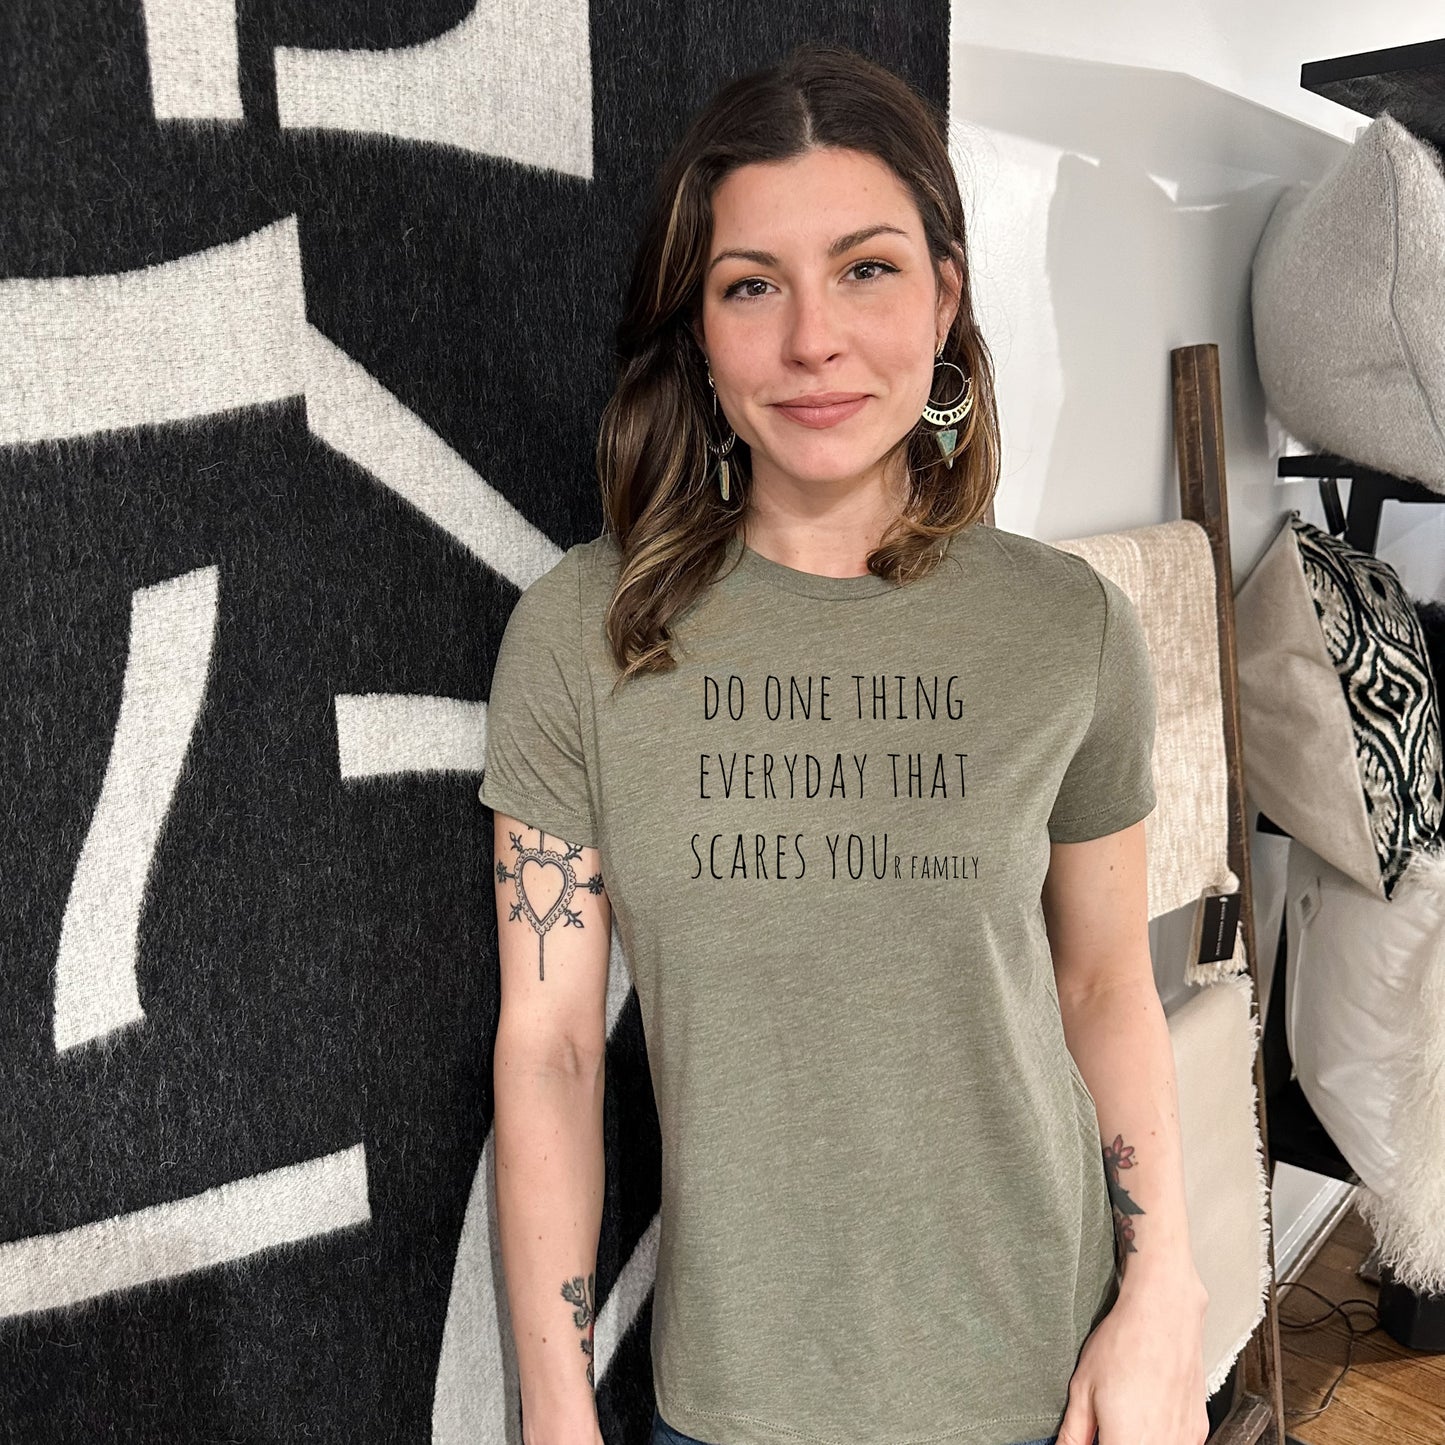 Do One Thing Every Day That Scares Your Family - Women's Crew Tee - Olive or Dusty Blue